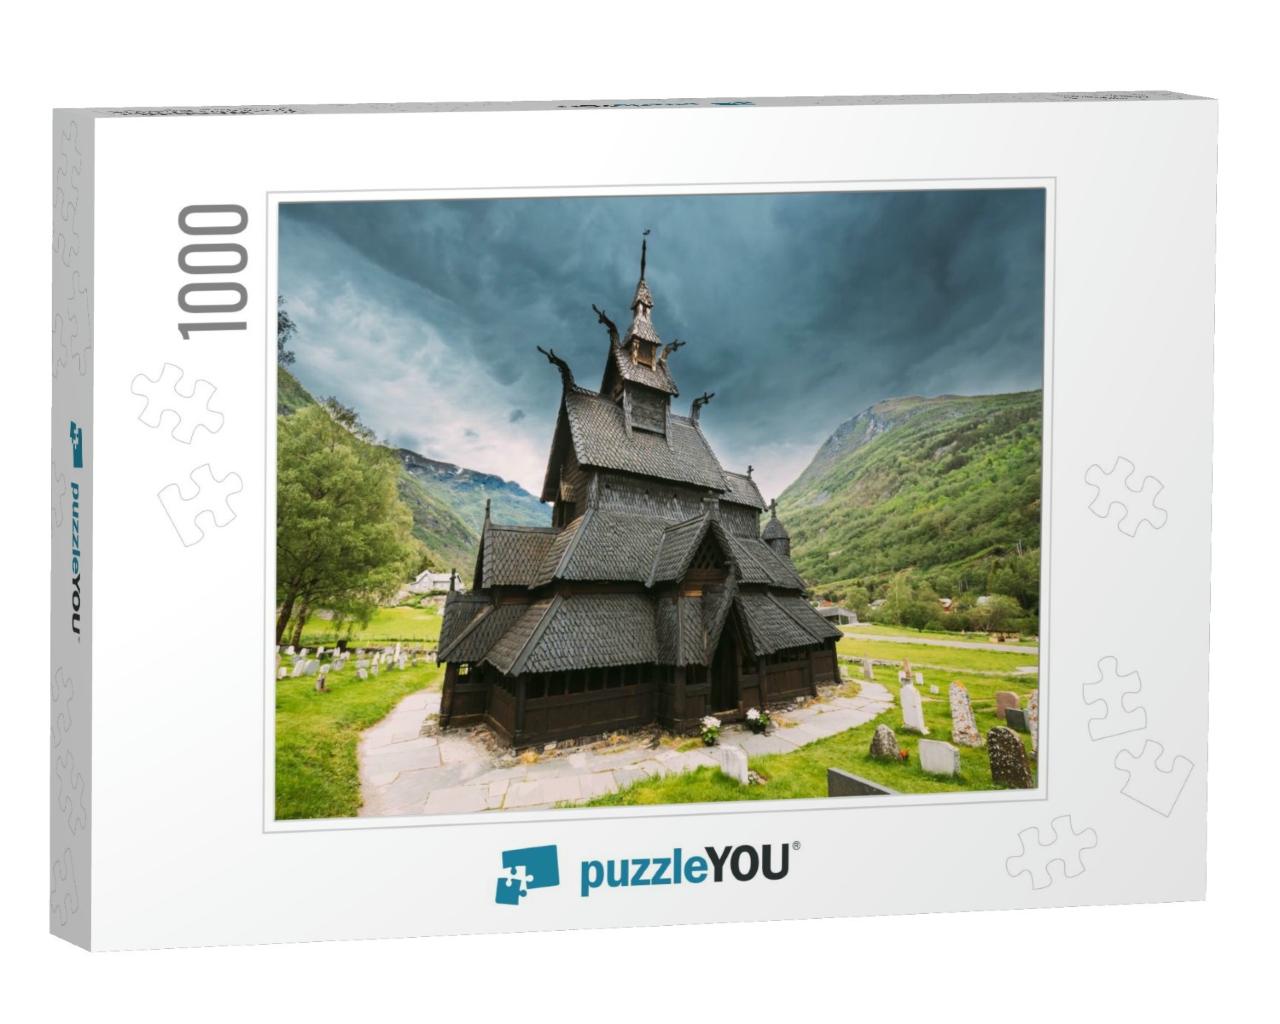 Borgund, Norway. Famous Landmark Stavkirke an Old Wooden... Jigsaw Puzzle with 1000 pieces